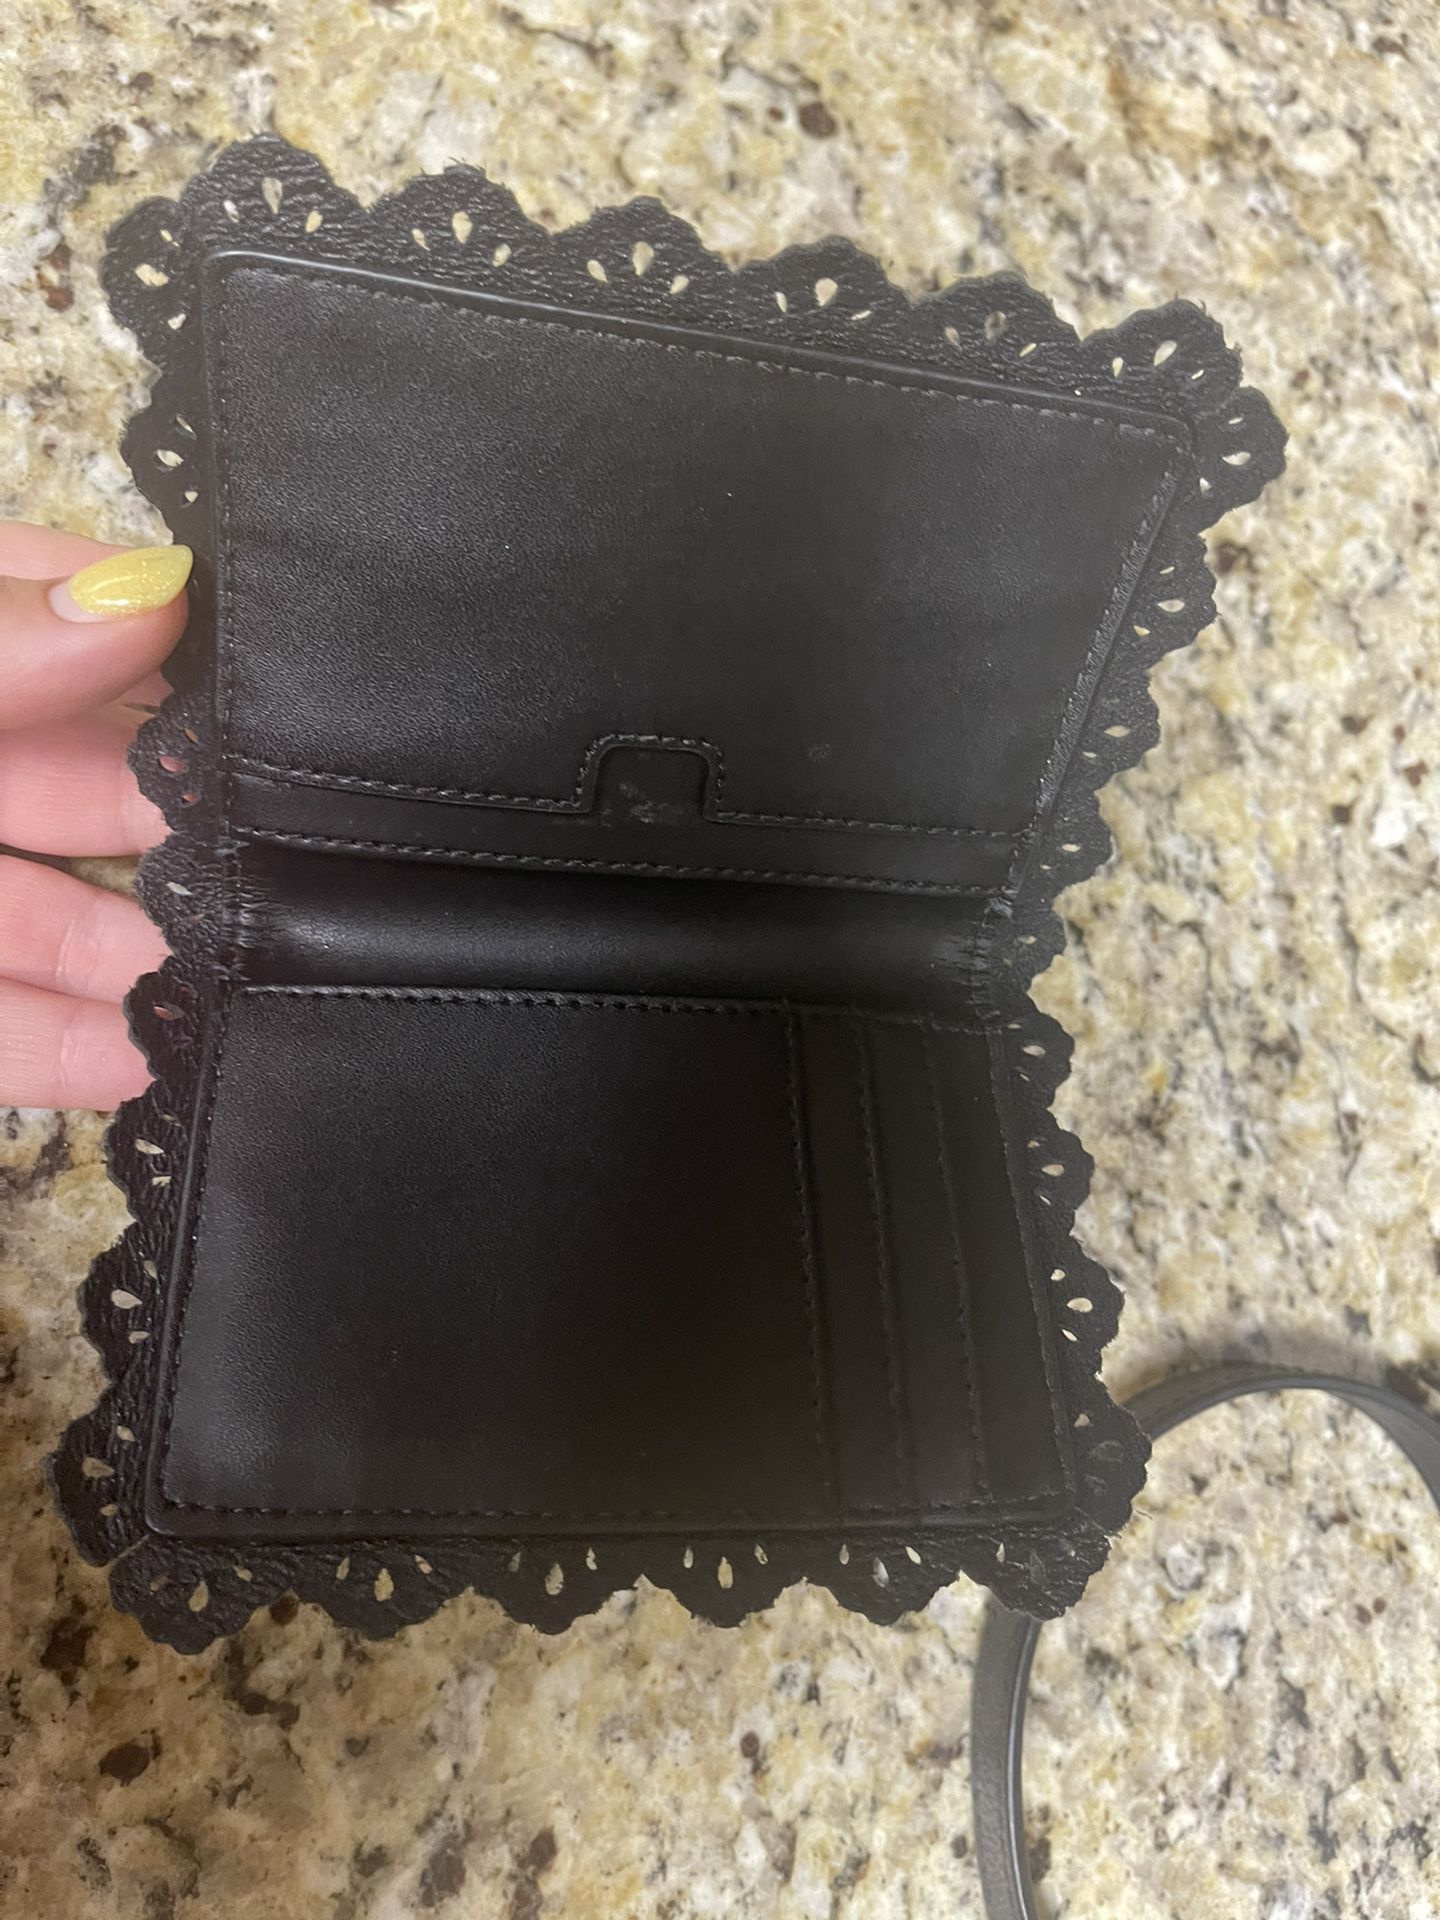 Black Kate Spade Purse Comes With Matching Wallet